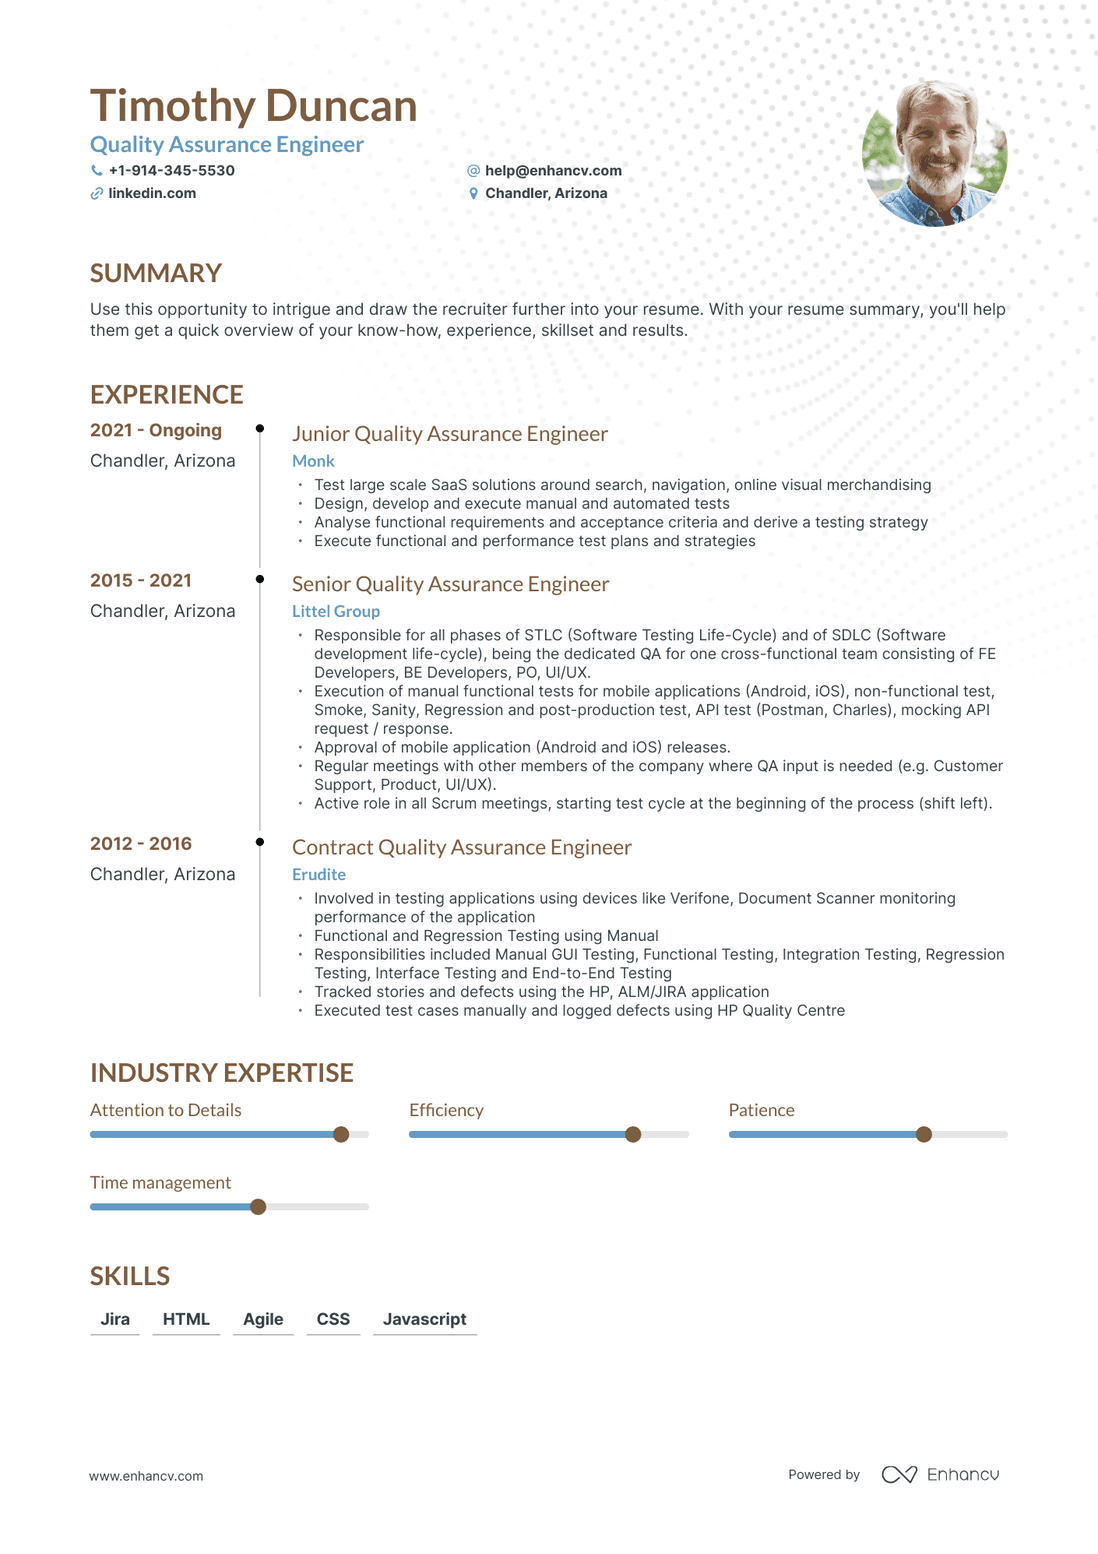 Quality Assurance Engineer Resume Examples & Guide for 2023 (Layout ...